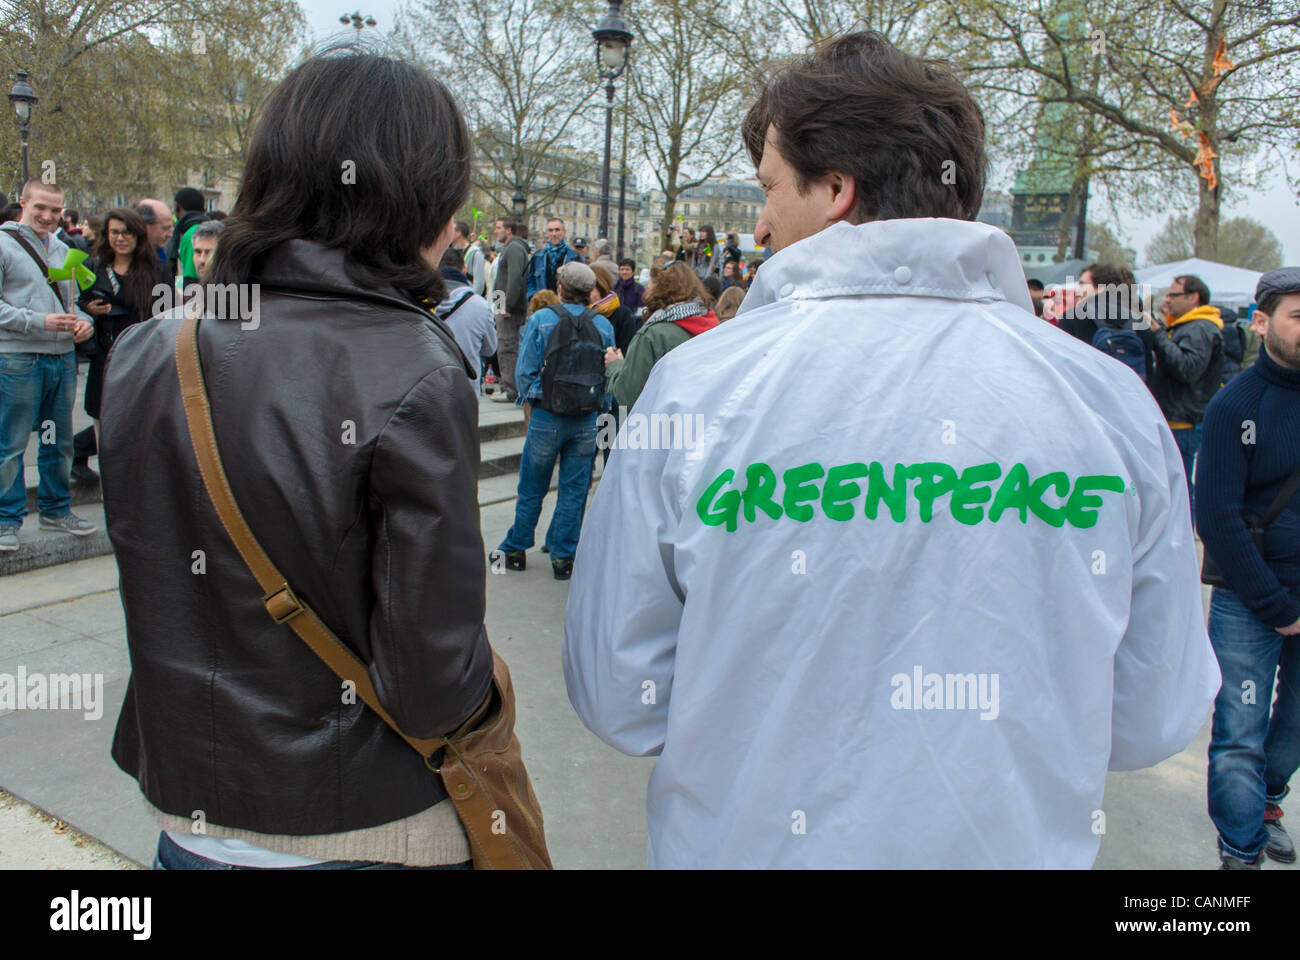 Paris, France, Environment Awareness Public Event, 'Liberons les Elections', during French Presidential Elections, Greenpeace Activist Distributing Wind Mill Fans, global problem Stock Photo